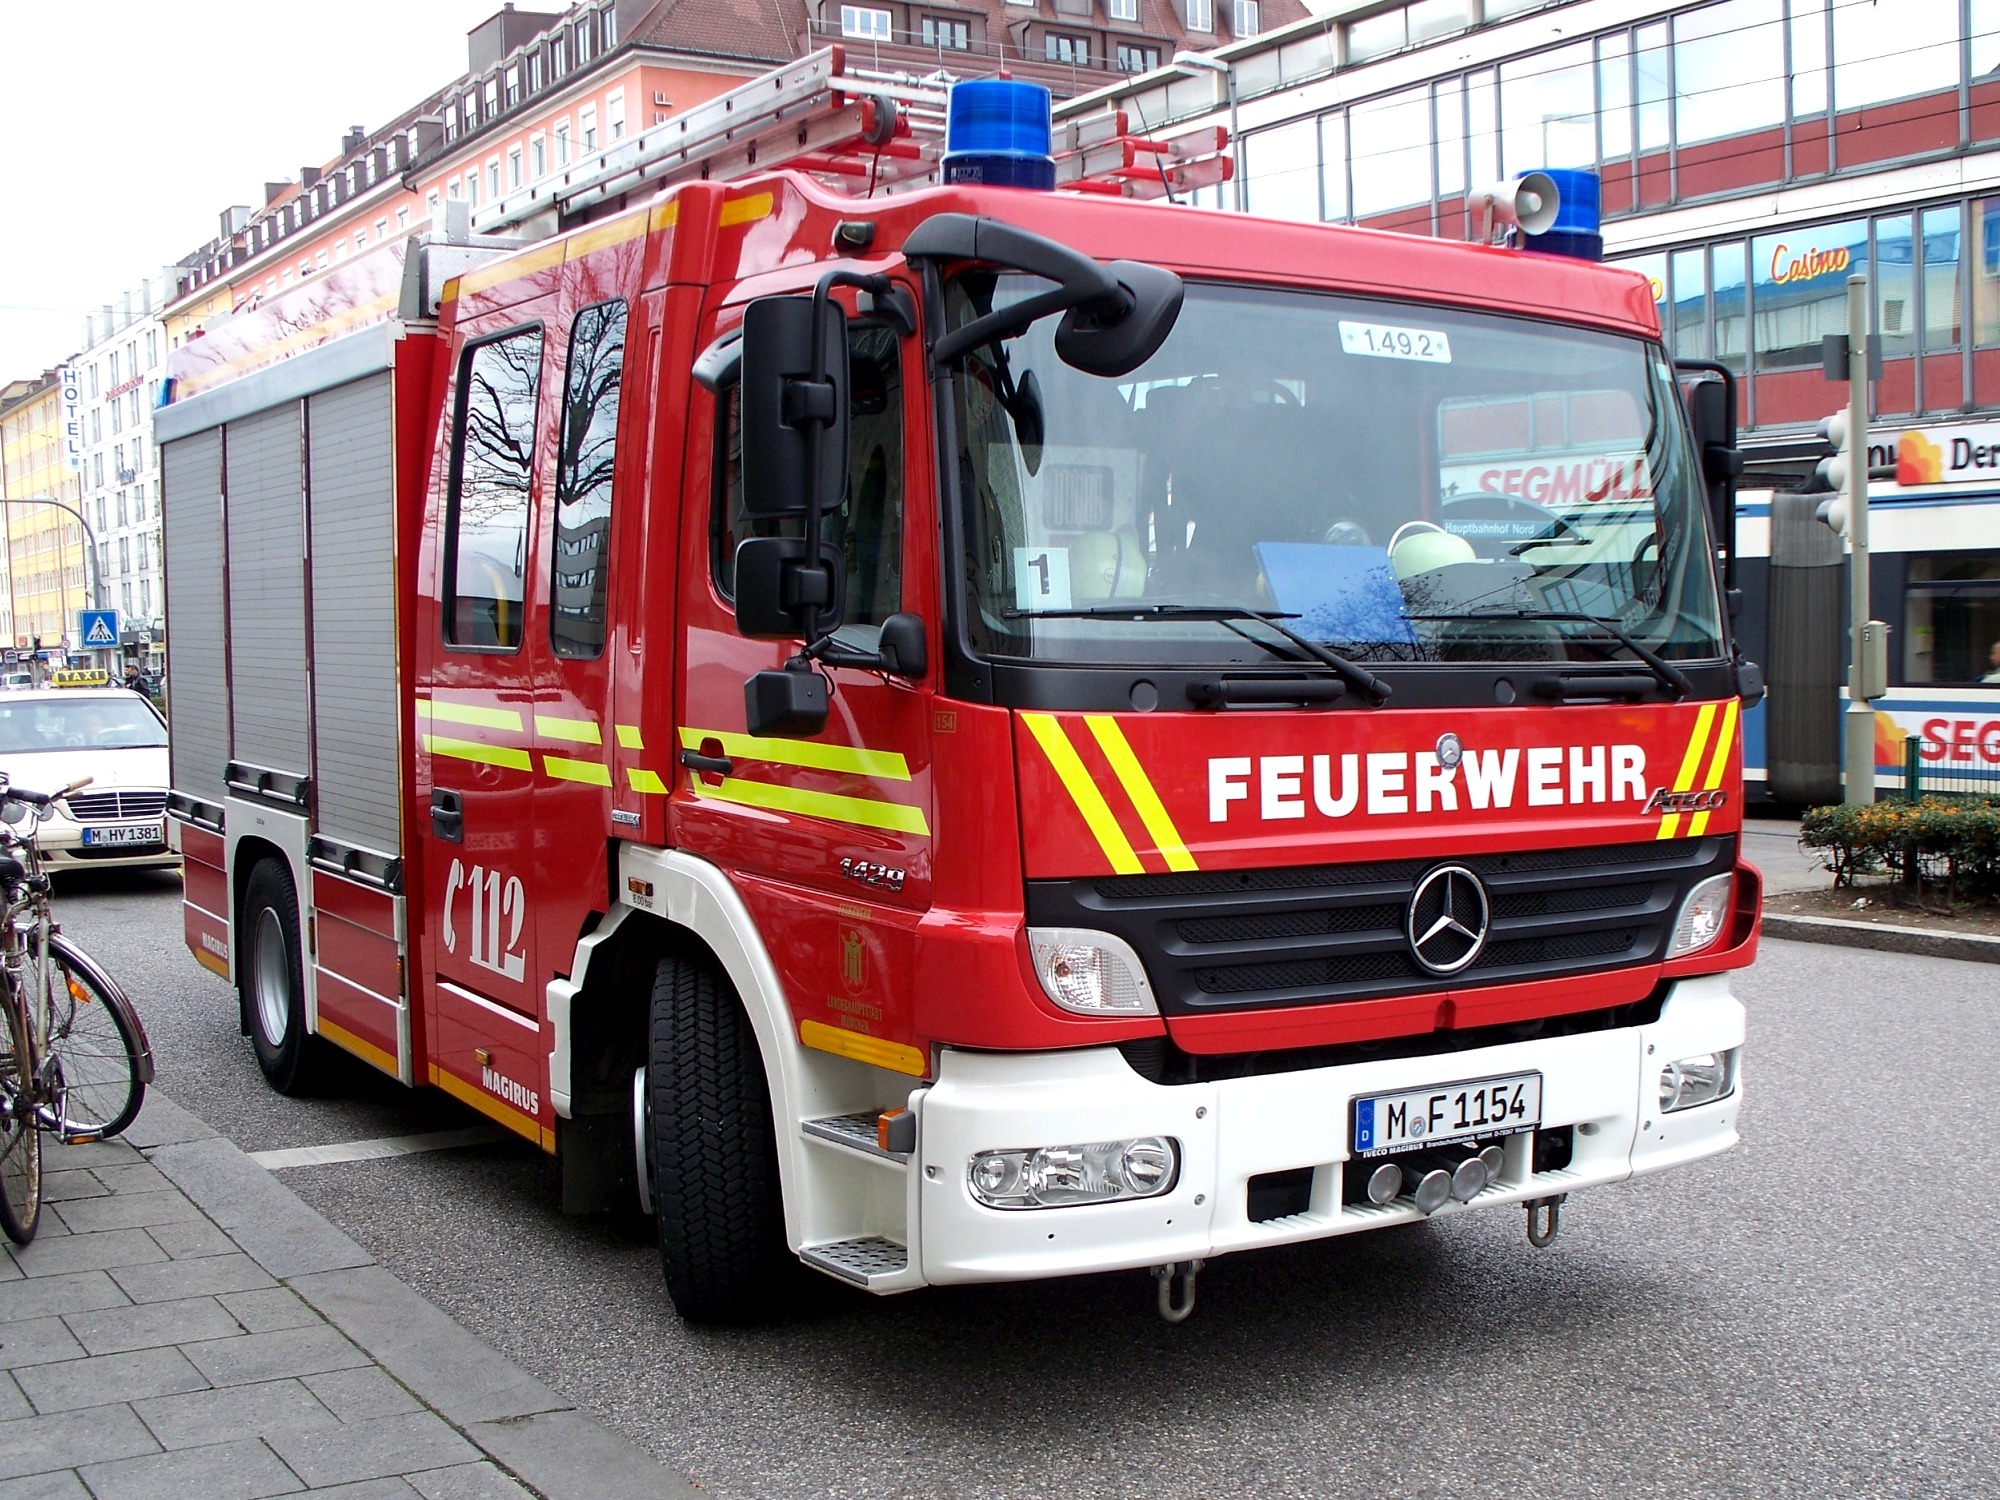 HQ Mercedes-benz Fire Truck Wallpapers | File 930.72Kb